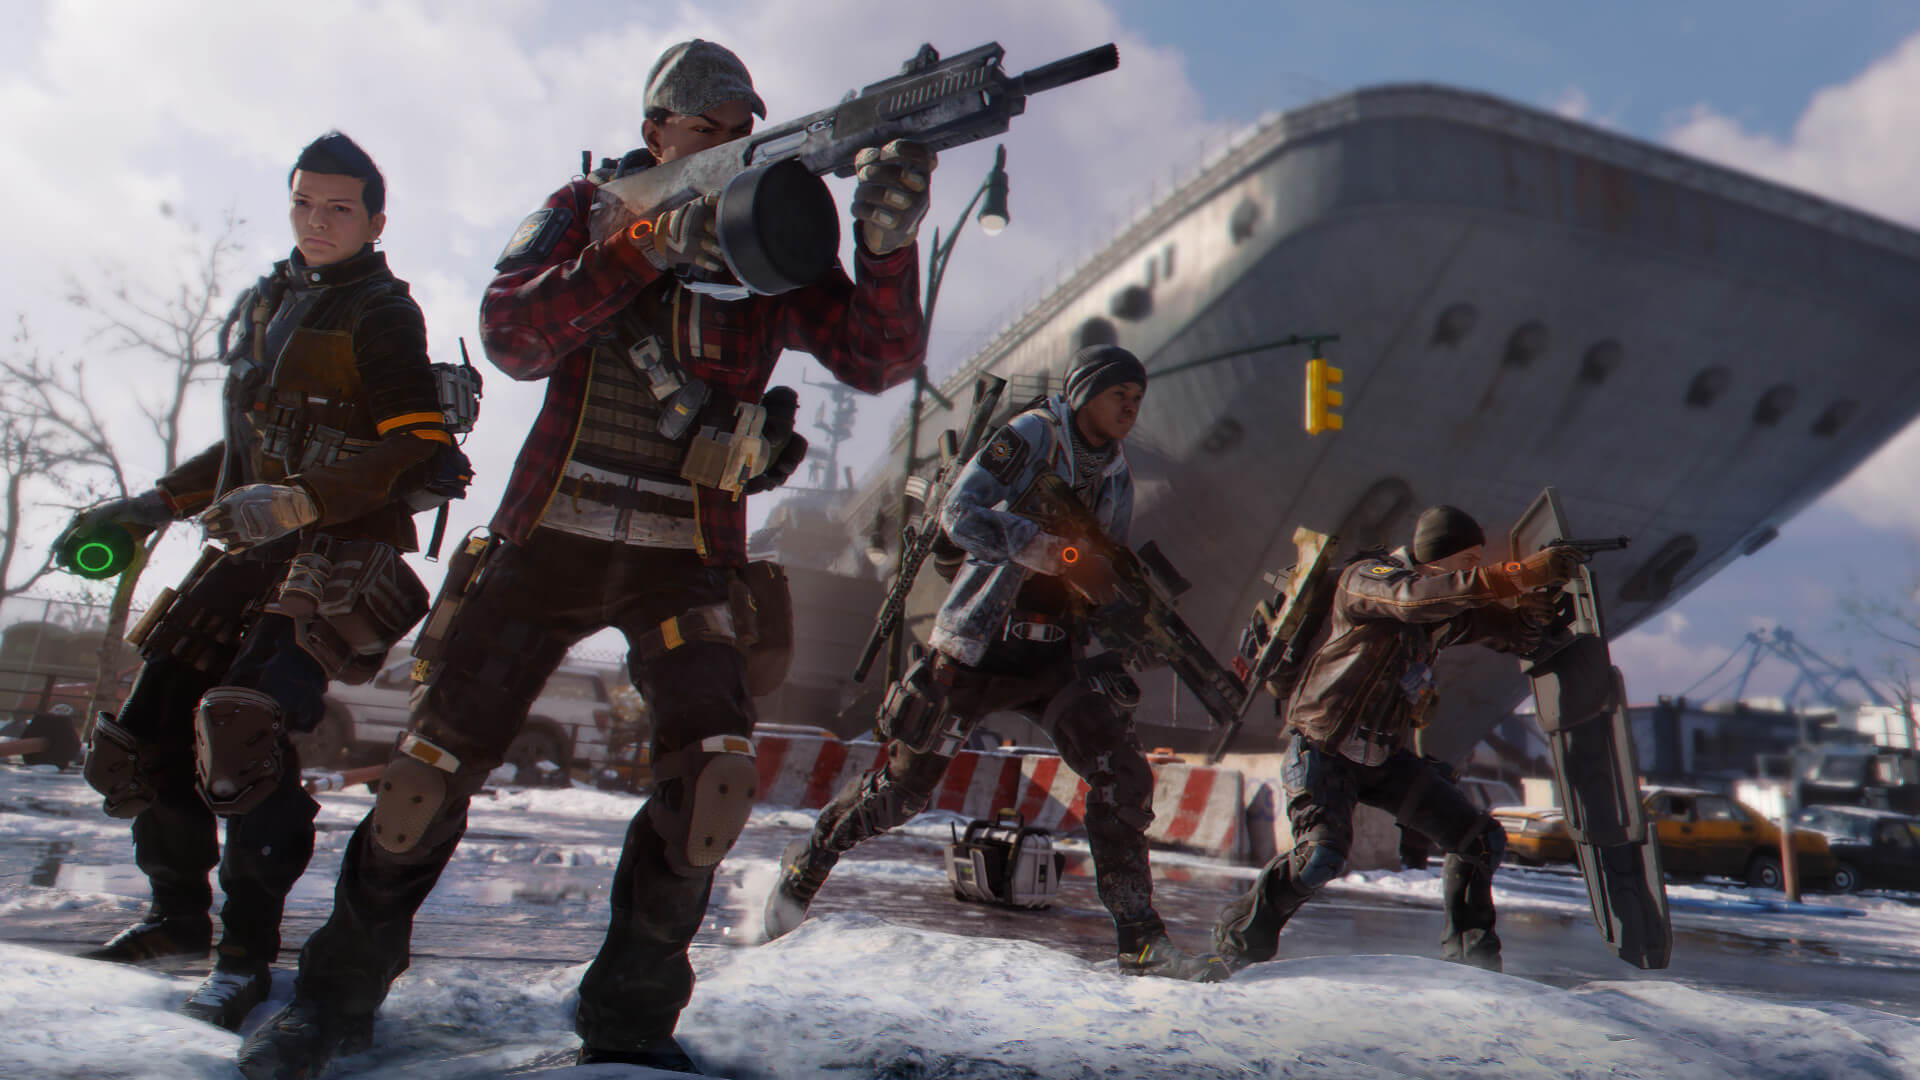 Four characters standing in a snowy area with a massive ship behind them in Tom Clancy's The Division, a Ubisoft game